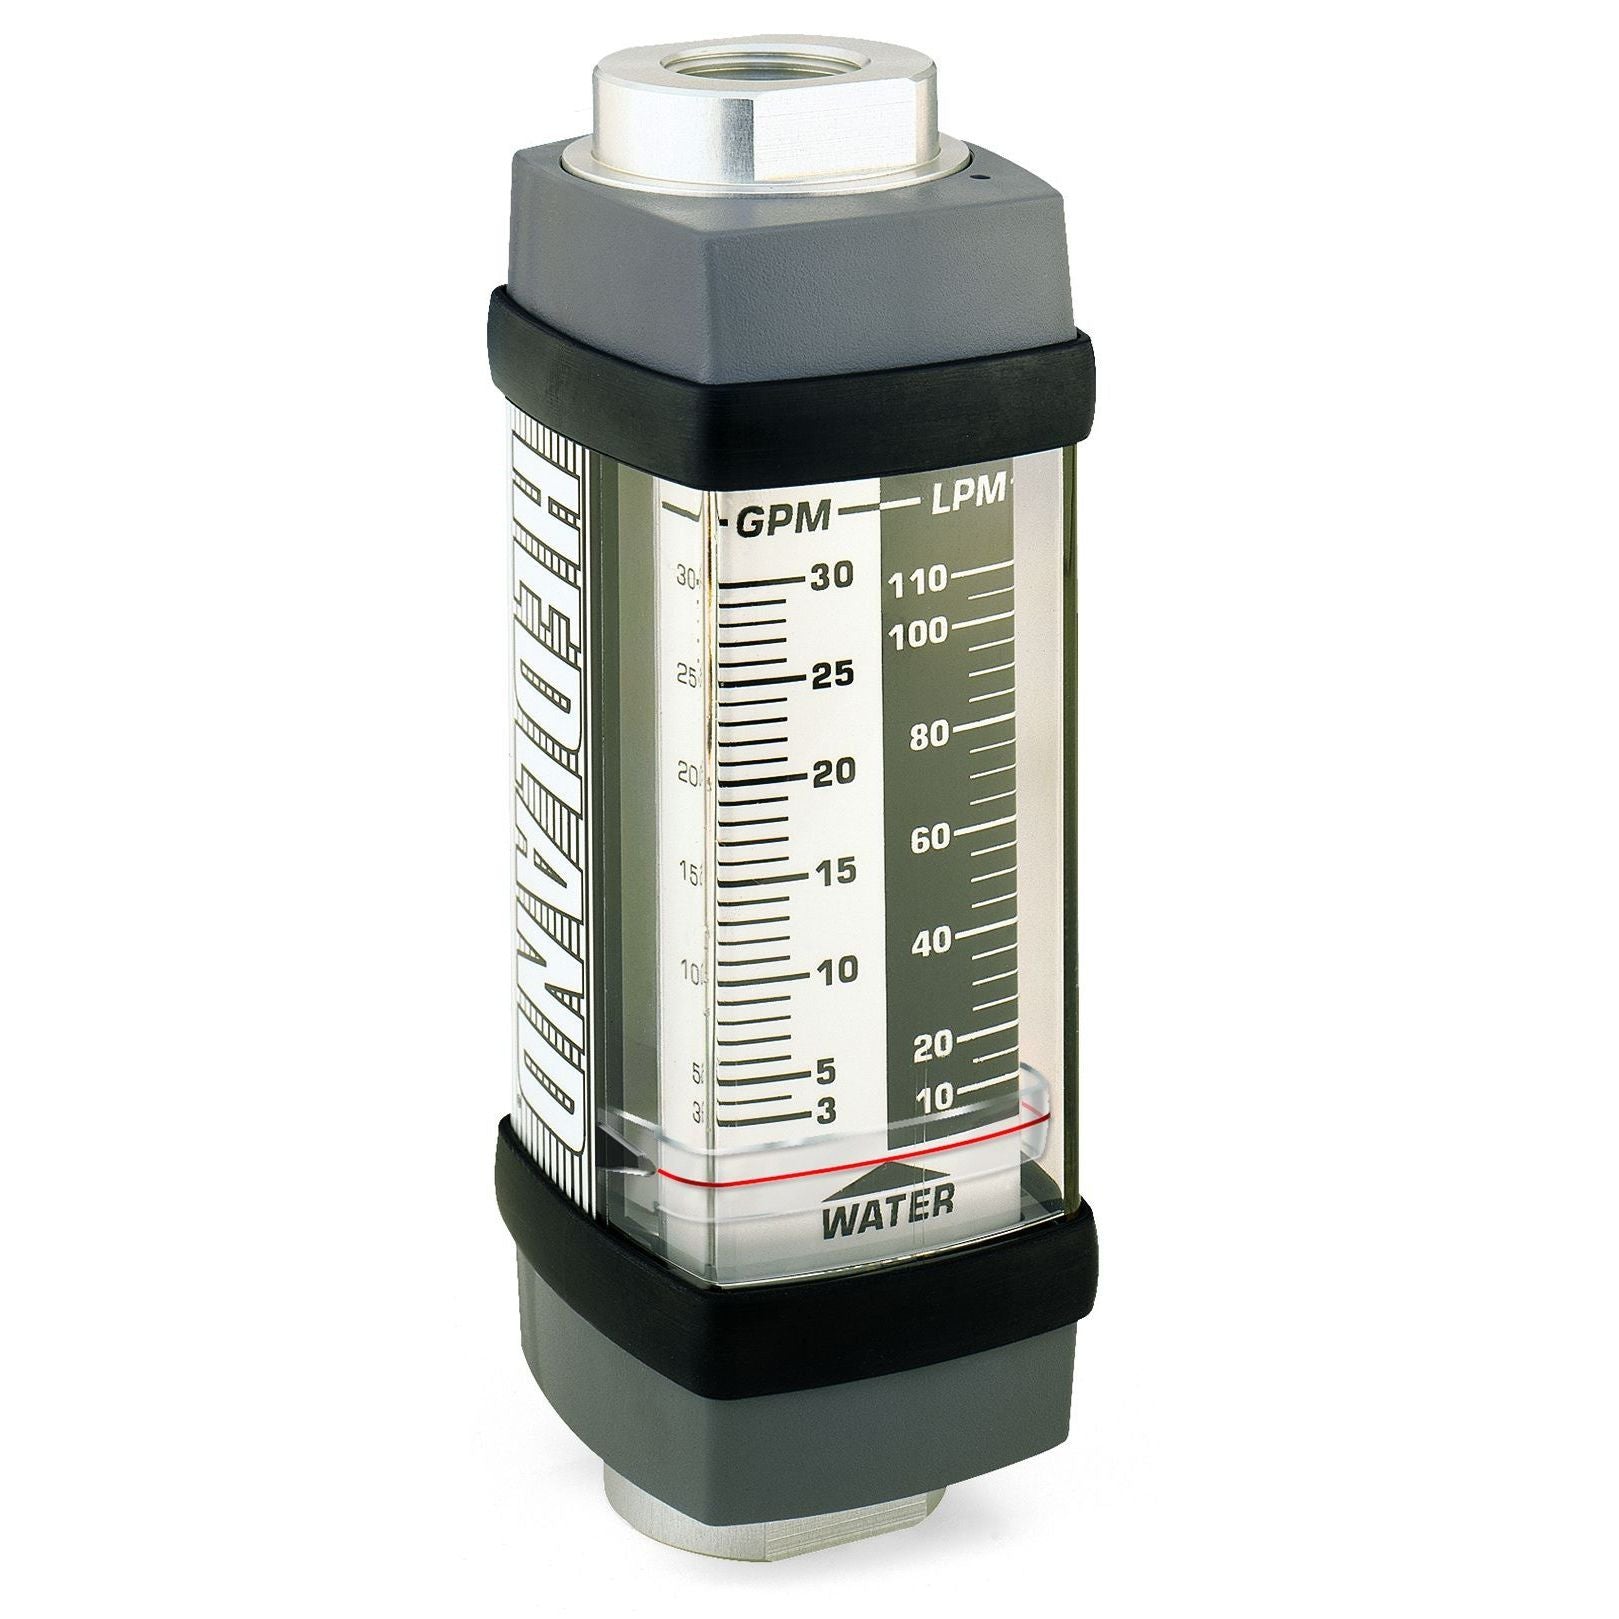 H834X-100 : Hedland 5000psi 316SS Flow Meter for Caustic or Corrosive Liquids, 1.25 NPT, 10 to 100 GPM